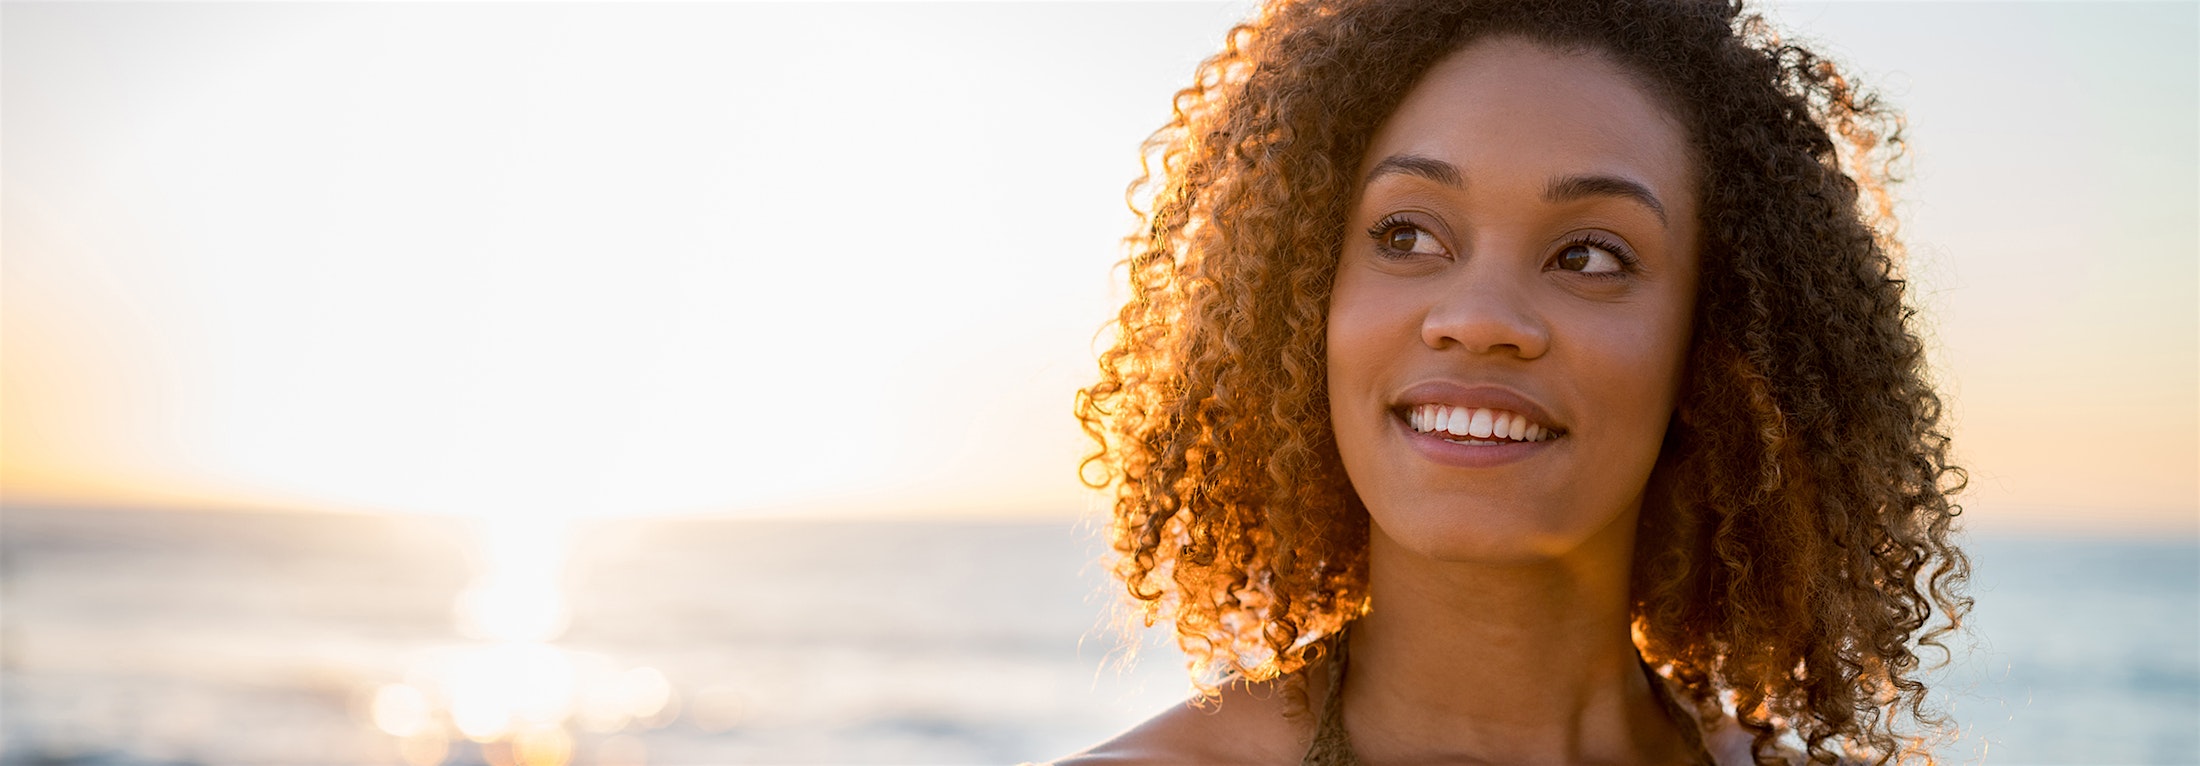 Woman with curly hair at the beach with the sunset in the background